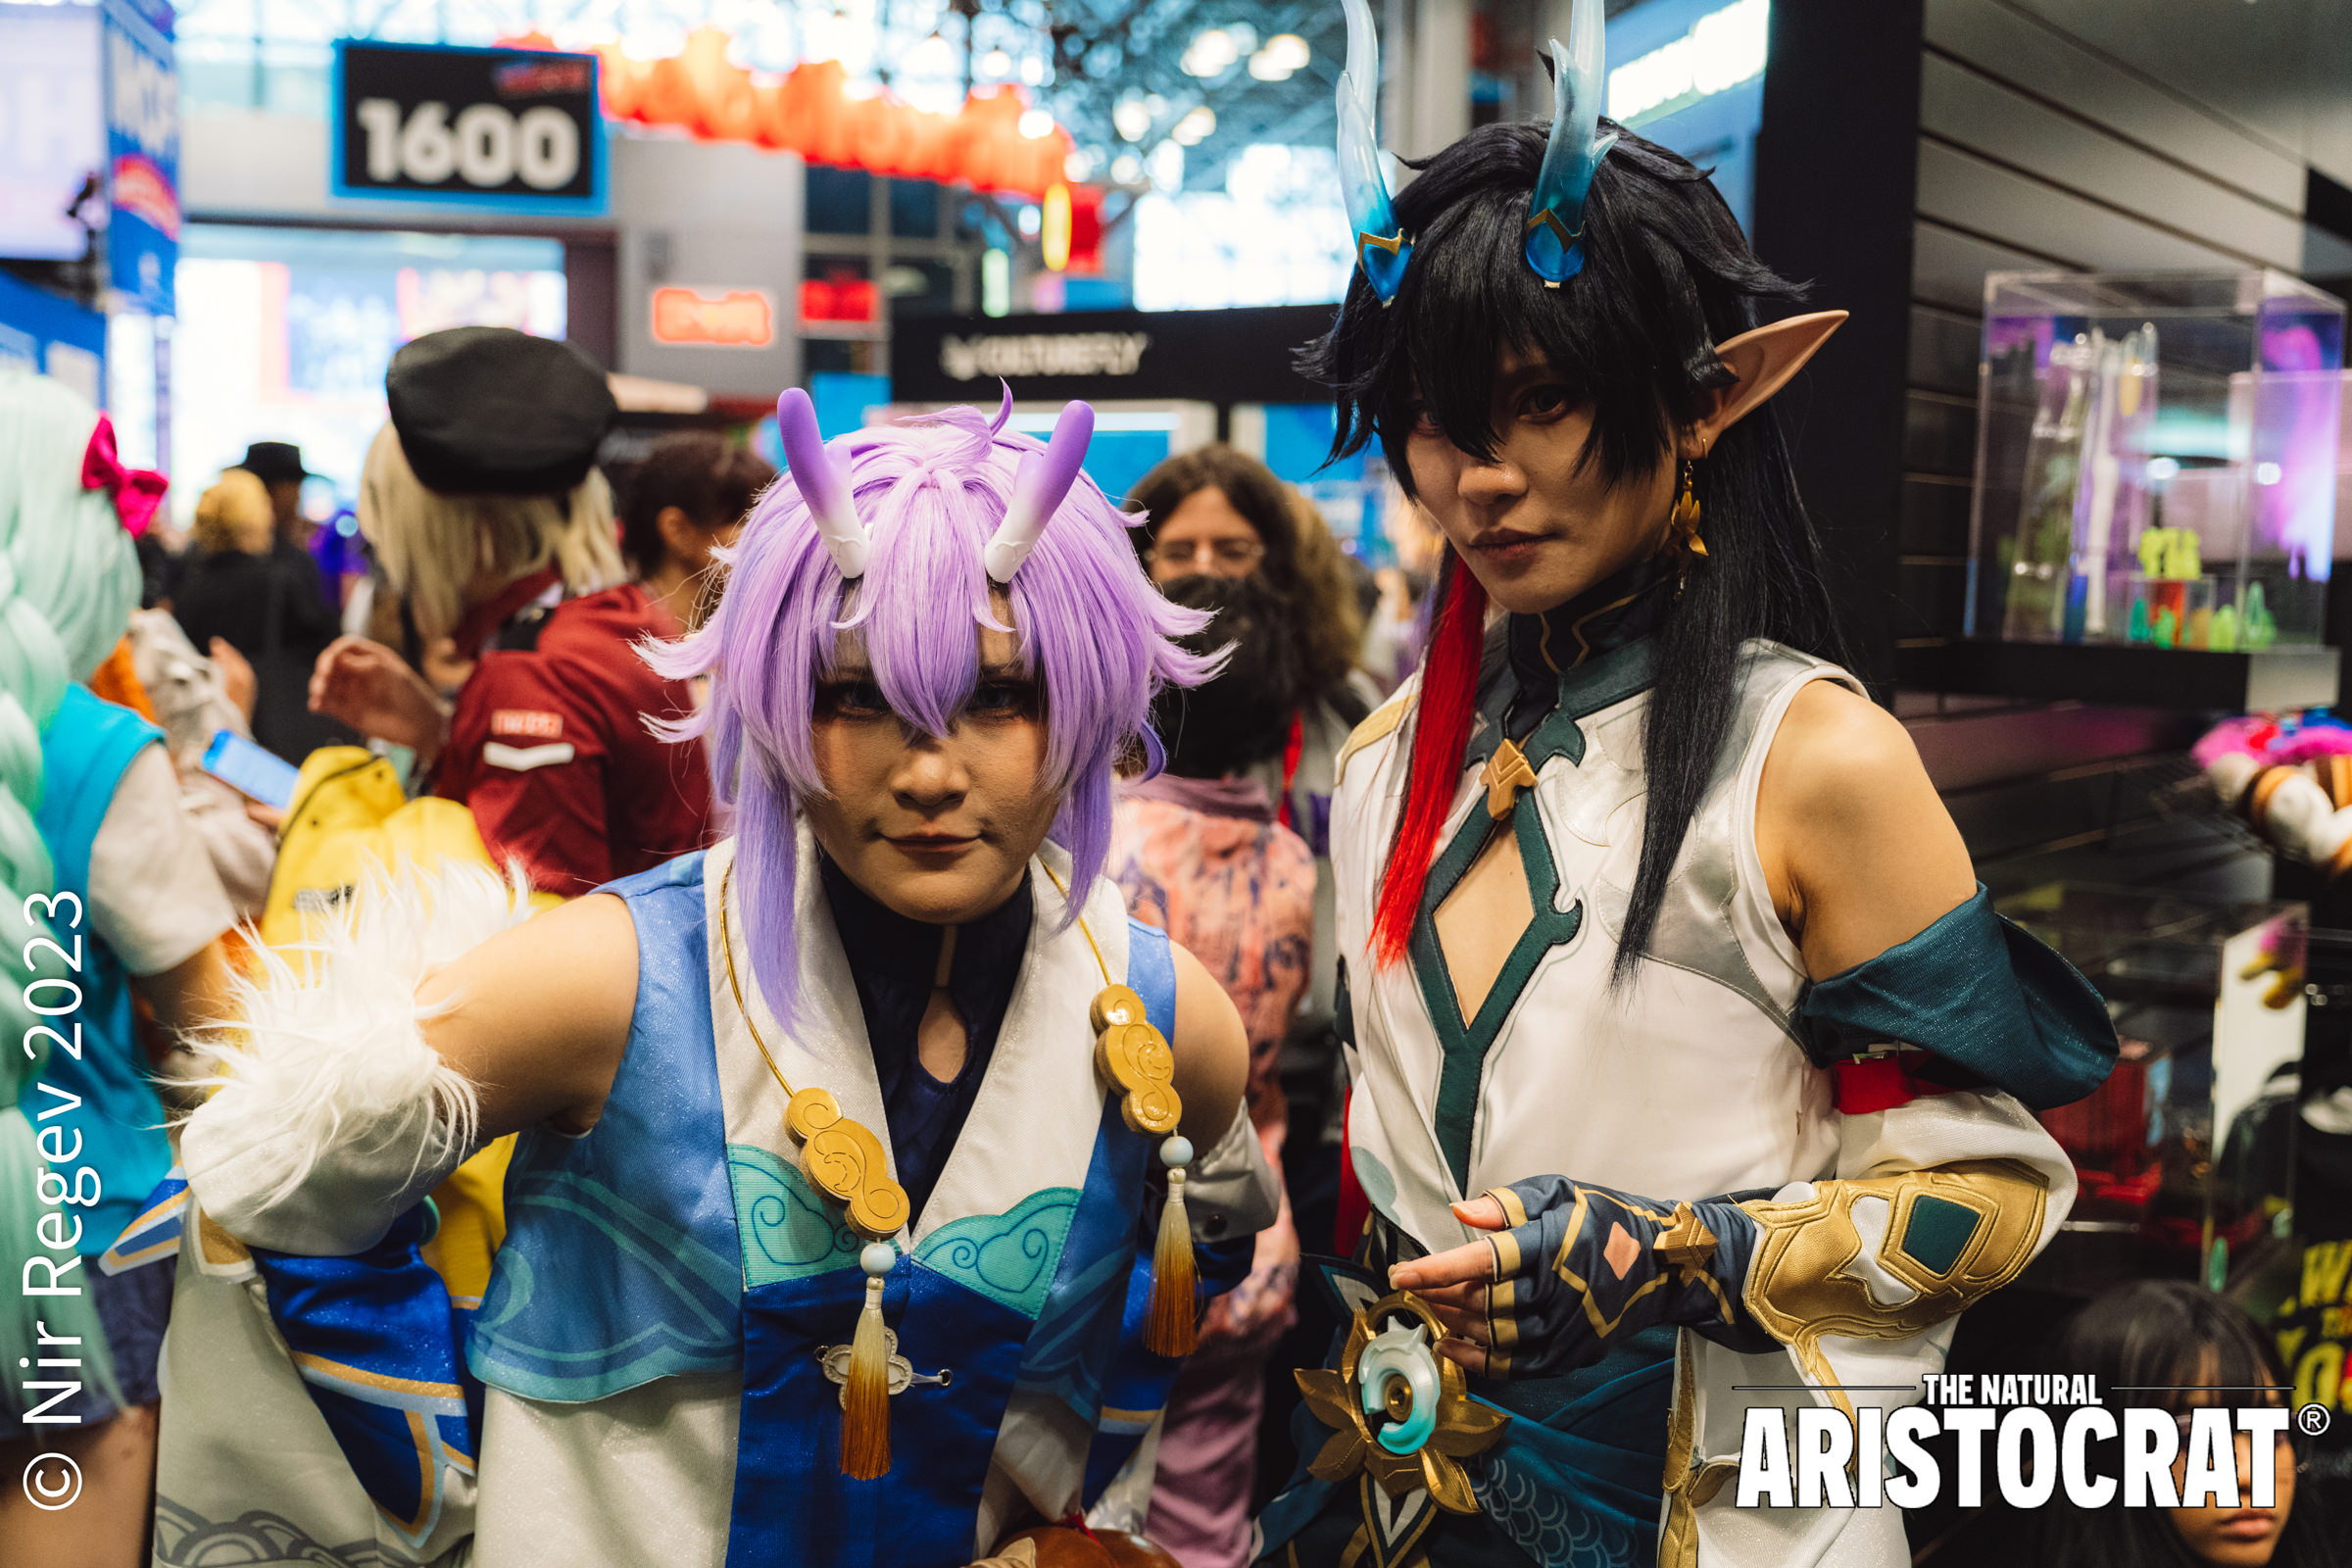 NYCC cosplayers at New York Comic Con 2023. Photo Credit: © Nir Regev 2023 - The Natural Aristocrat®